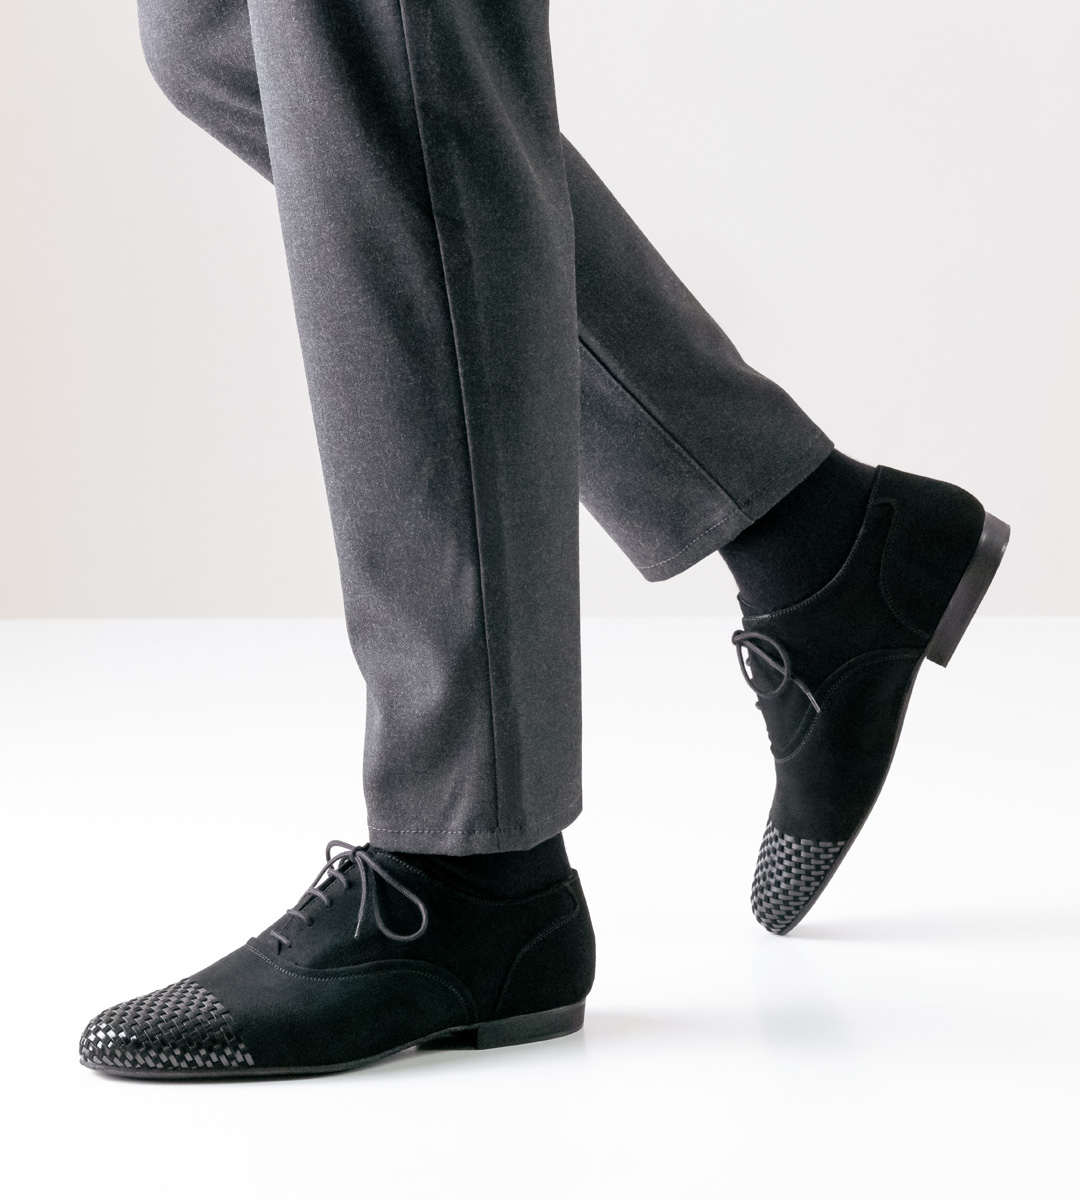 black men's dance shoe by Werner Kern with patent weave